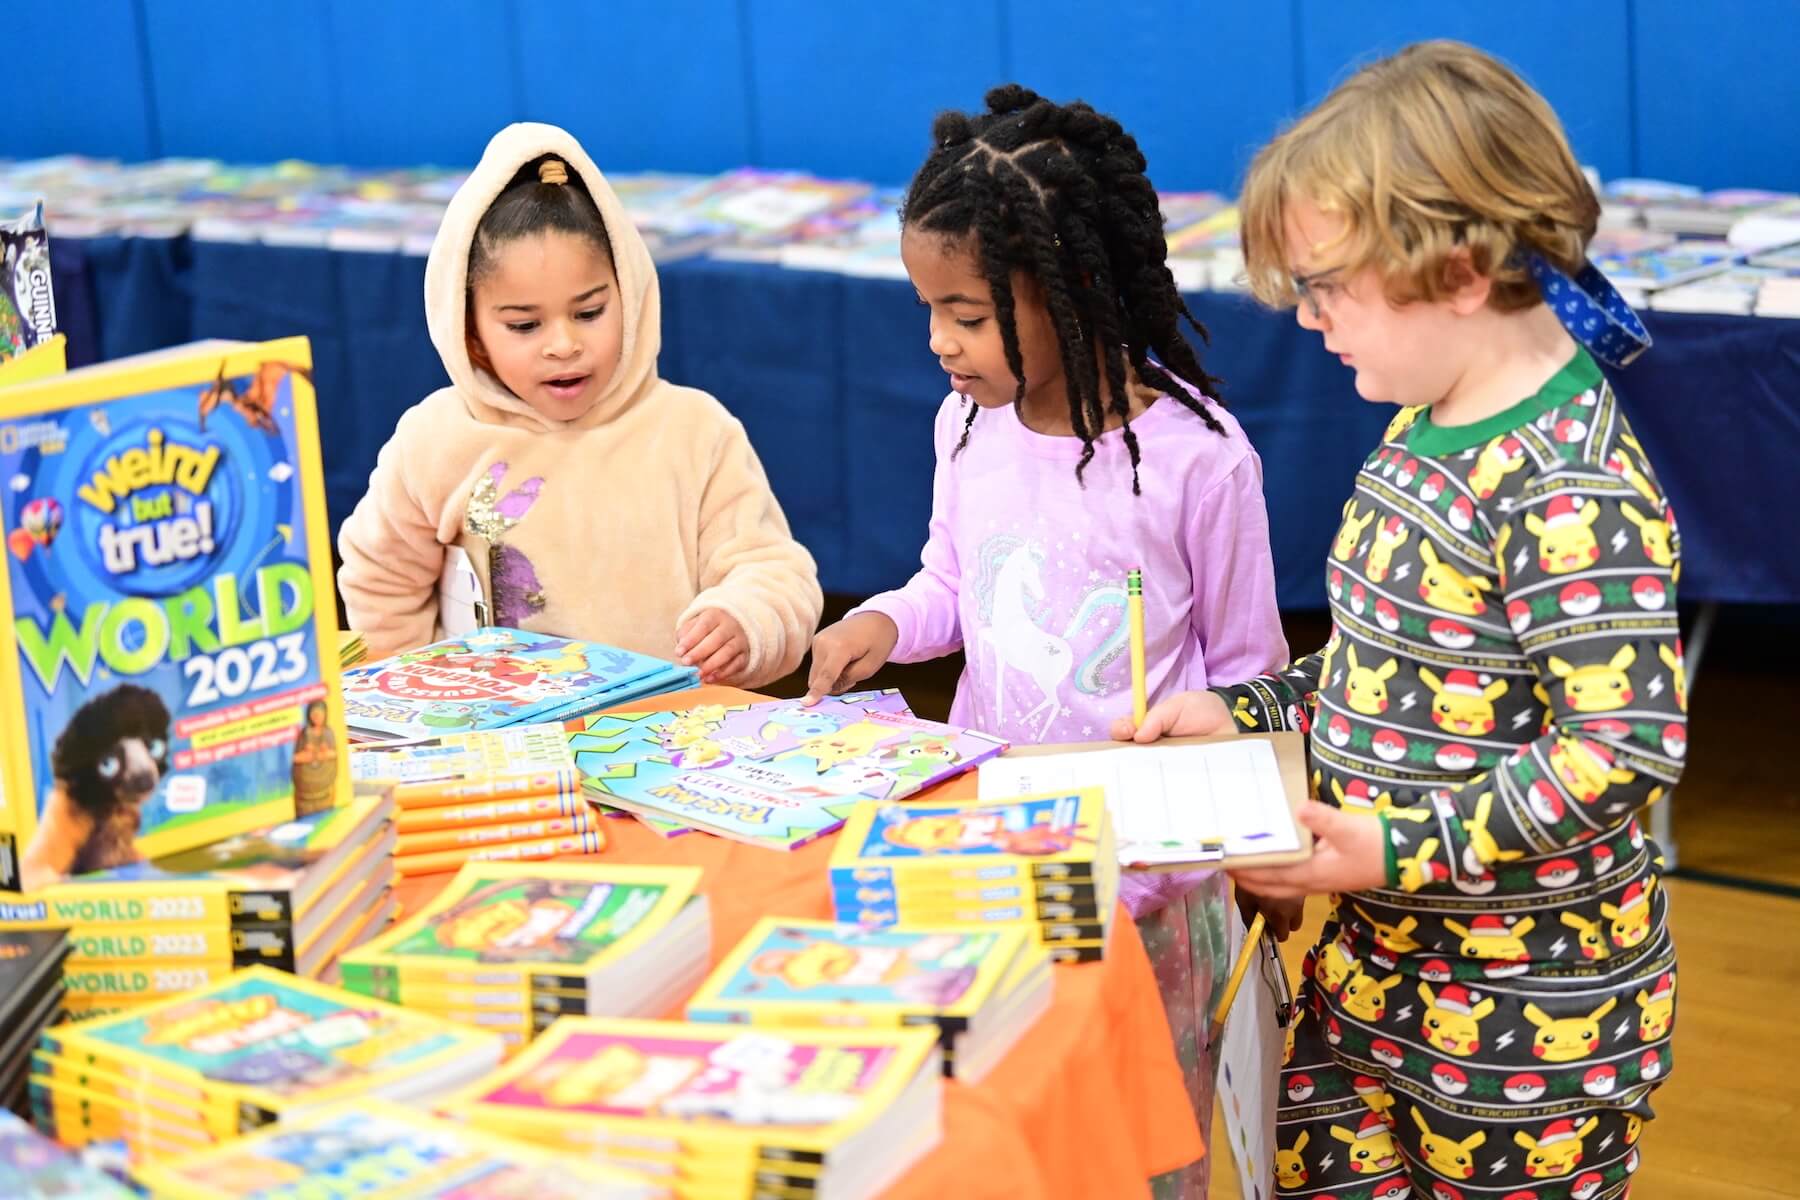 Ethical Culture Fieldston School Fieldston students sharing books during celebration of books